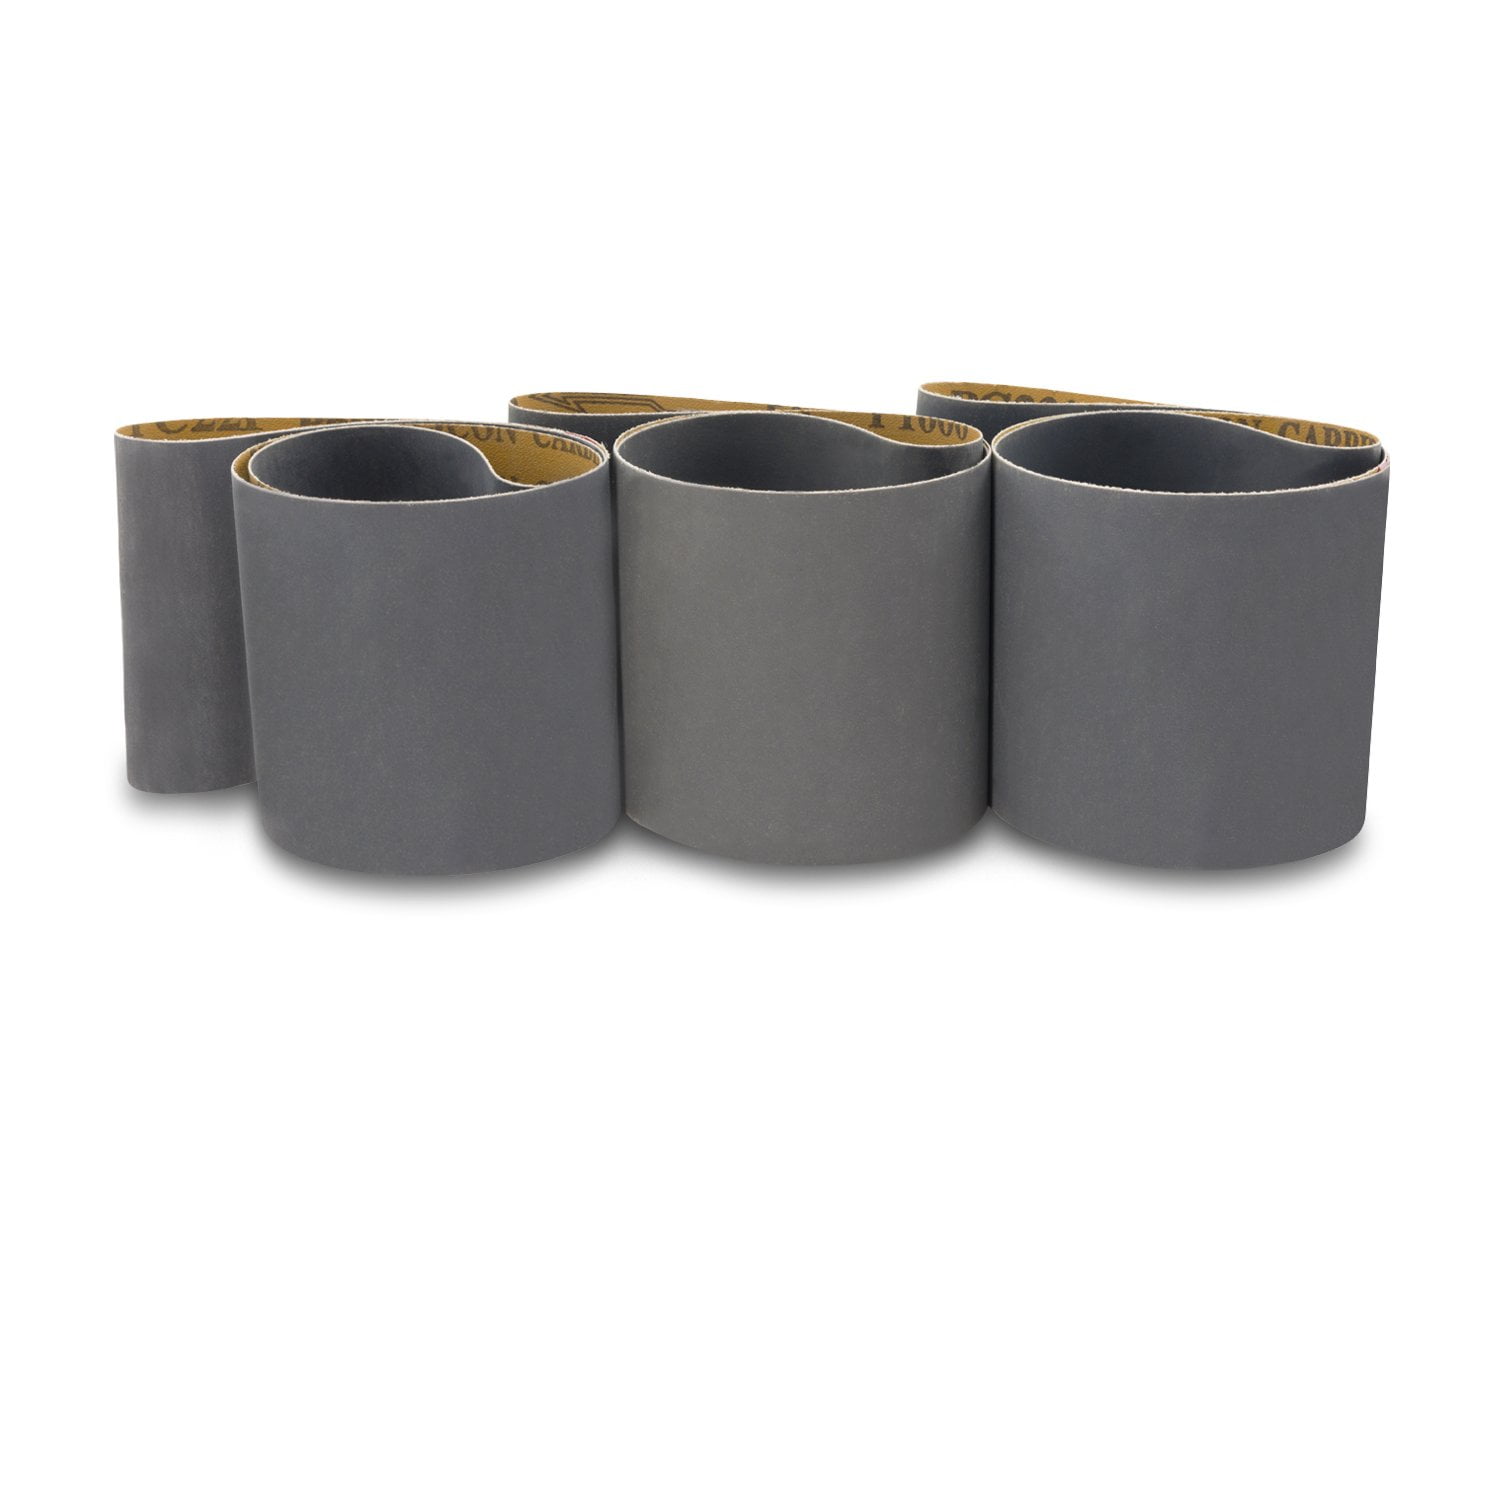 4 X 36 Inch 36 Grit Silicon Carbide Sanding Belts 3 Pack 